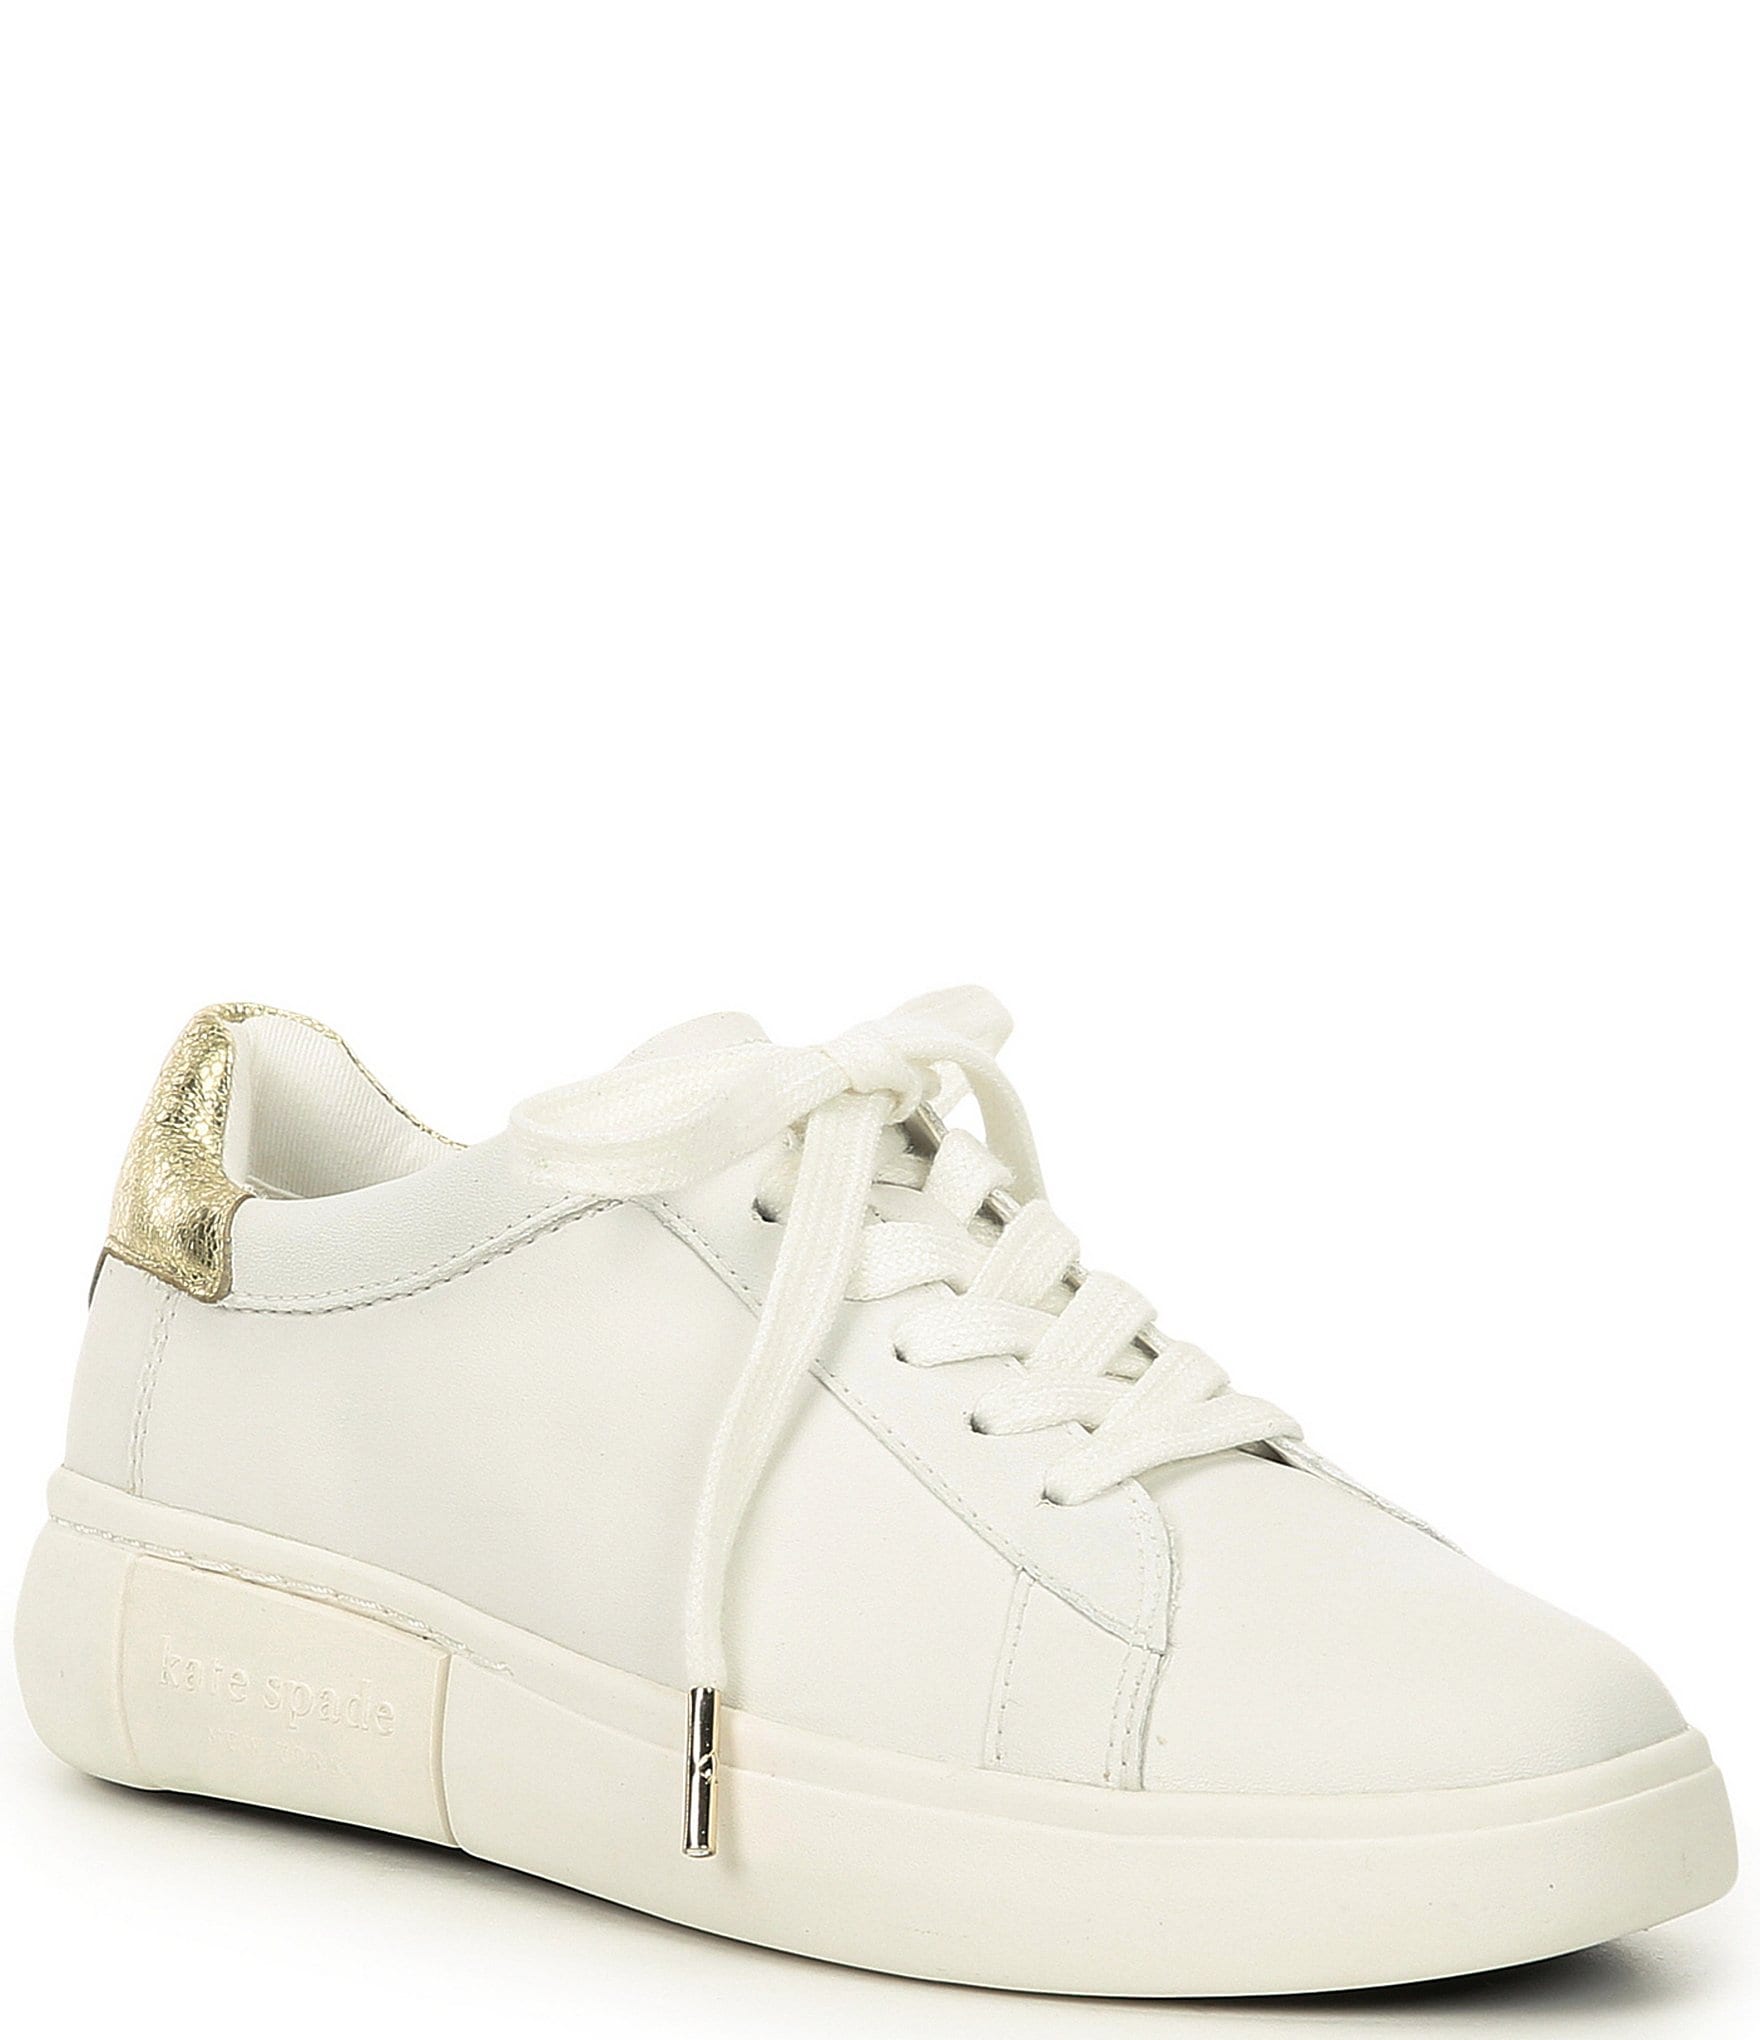 kate spade new york Lift Leather Gold Detail Sneakers | Dillard's